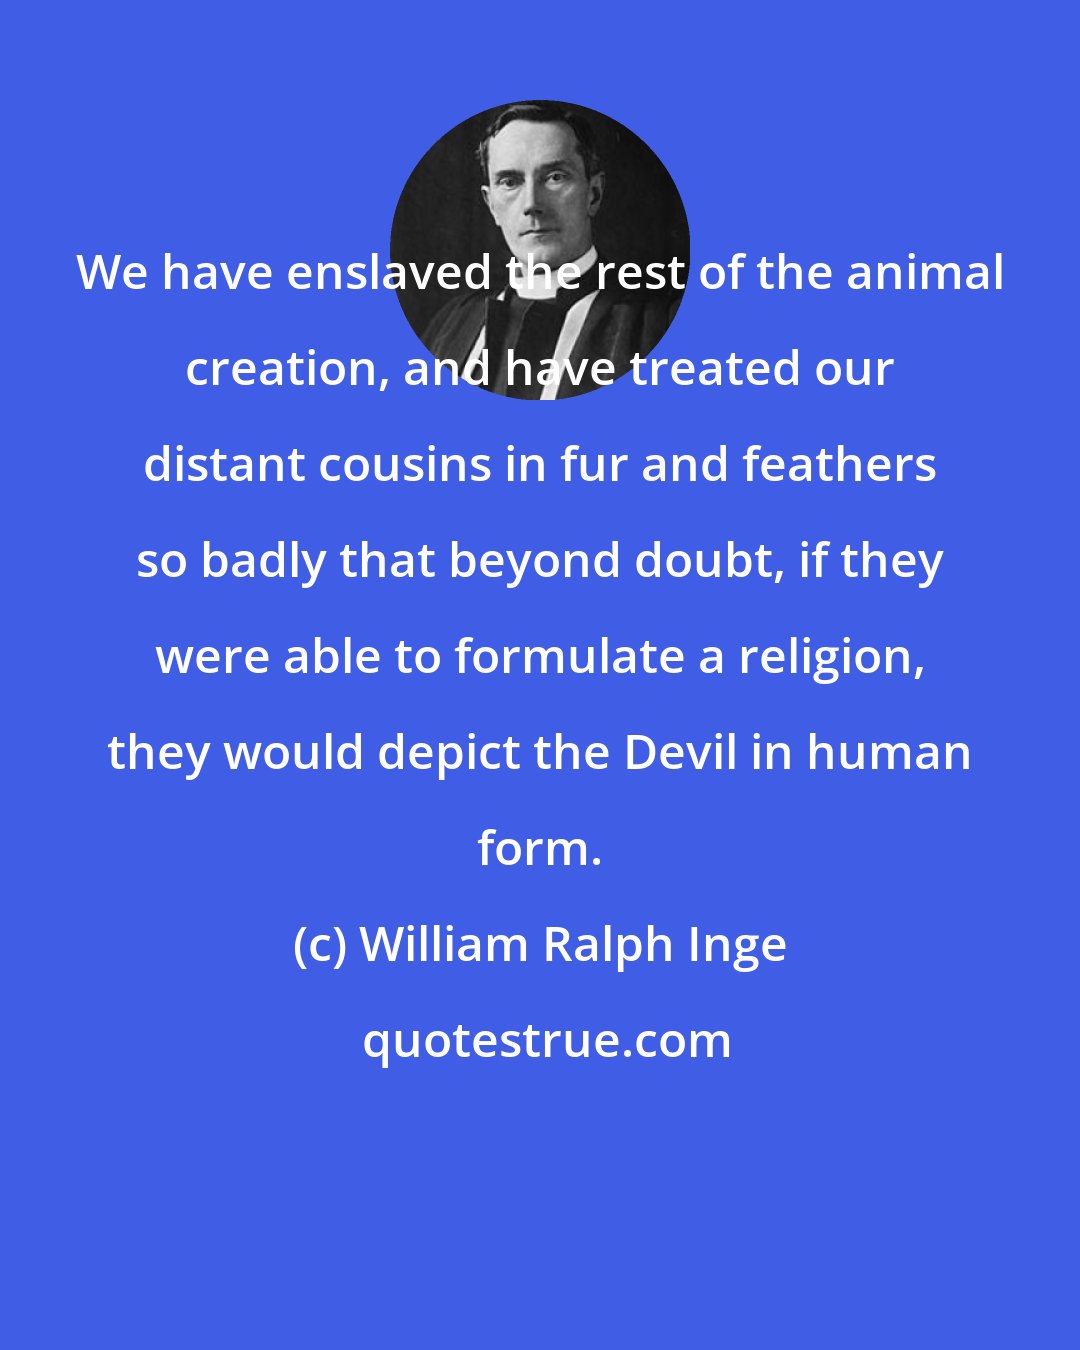 William Ralph Inge: We have enslaved the rest of the animal creation, and have treated our distant cousins in fur and feathers so badly that beyond doubt, if they were able to formulate a religion, they would depict the Devil in human form.